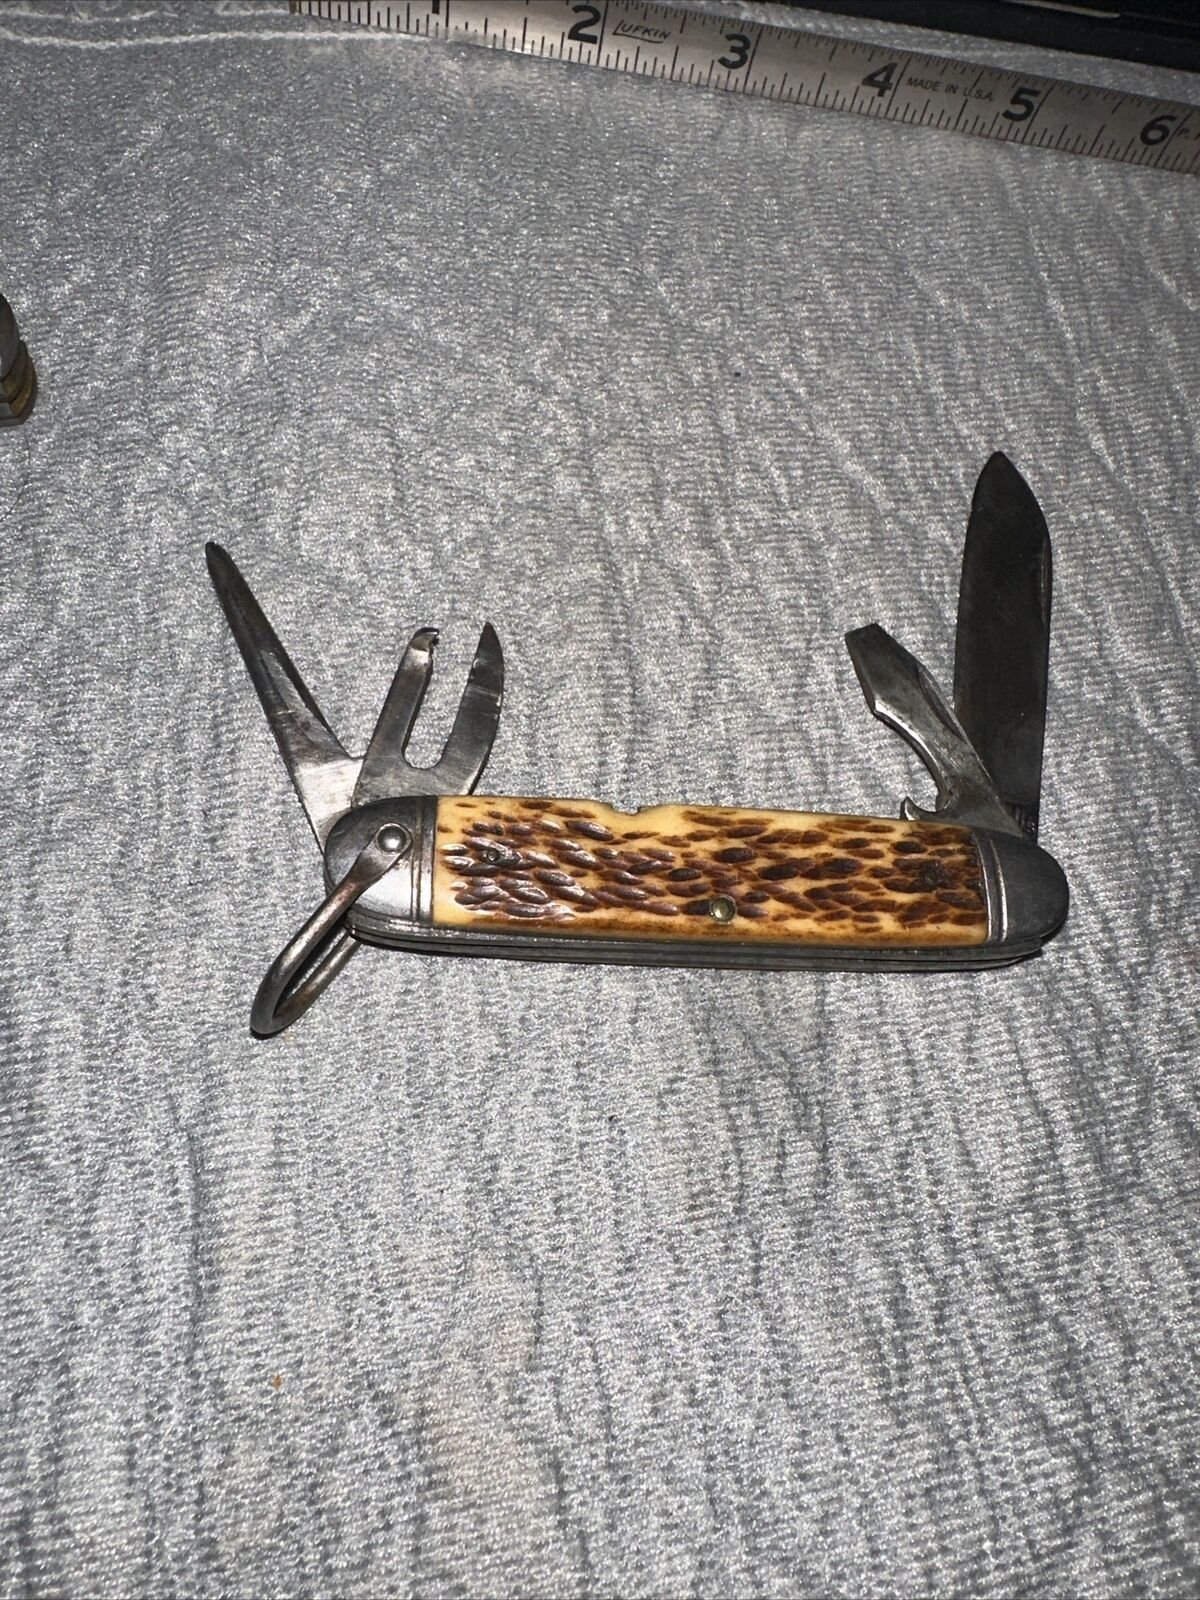 Early Camillus Cutlery - 1 Blade - 3 tool Folding Knife - Bone Stag Camping